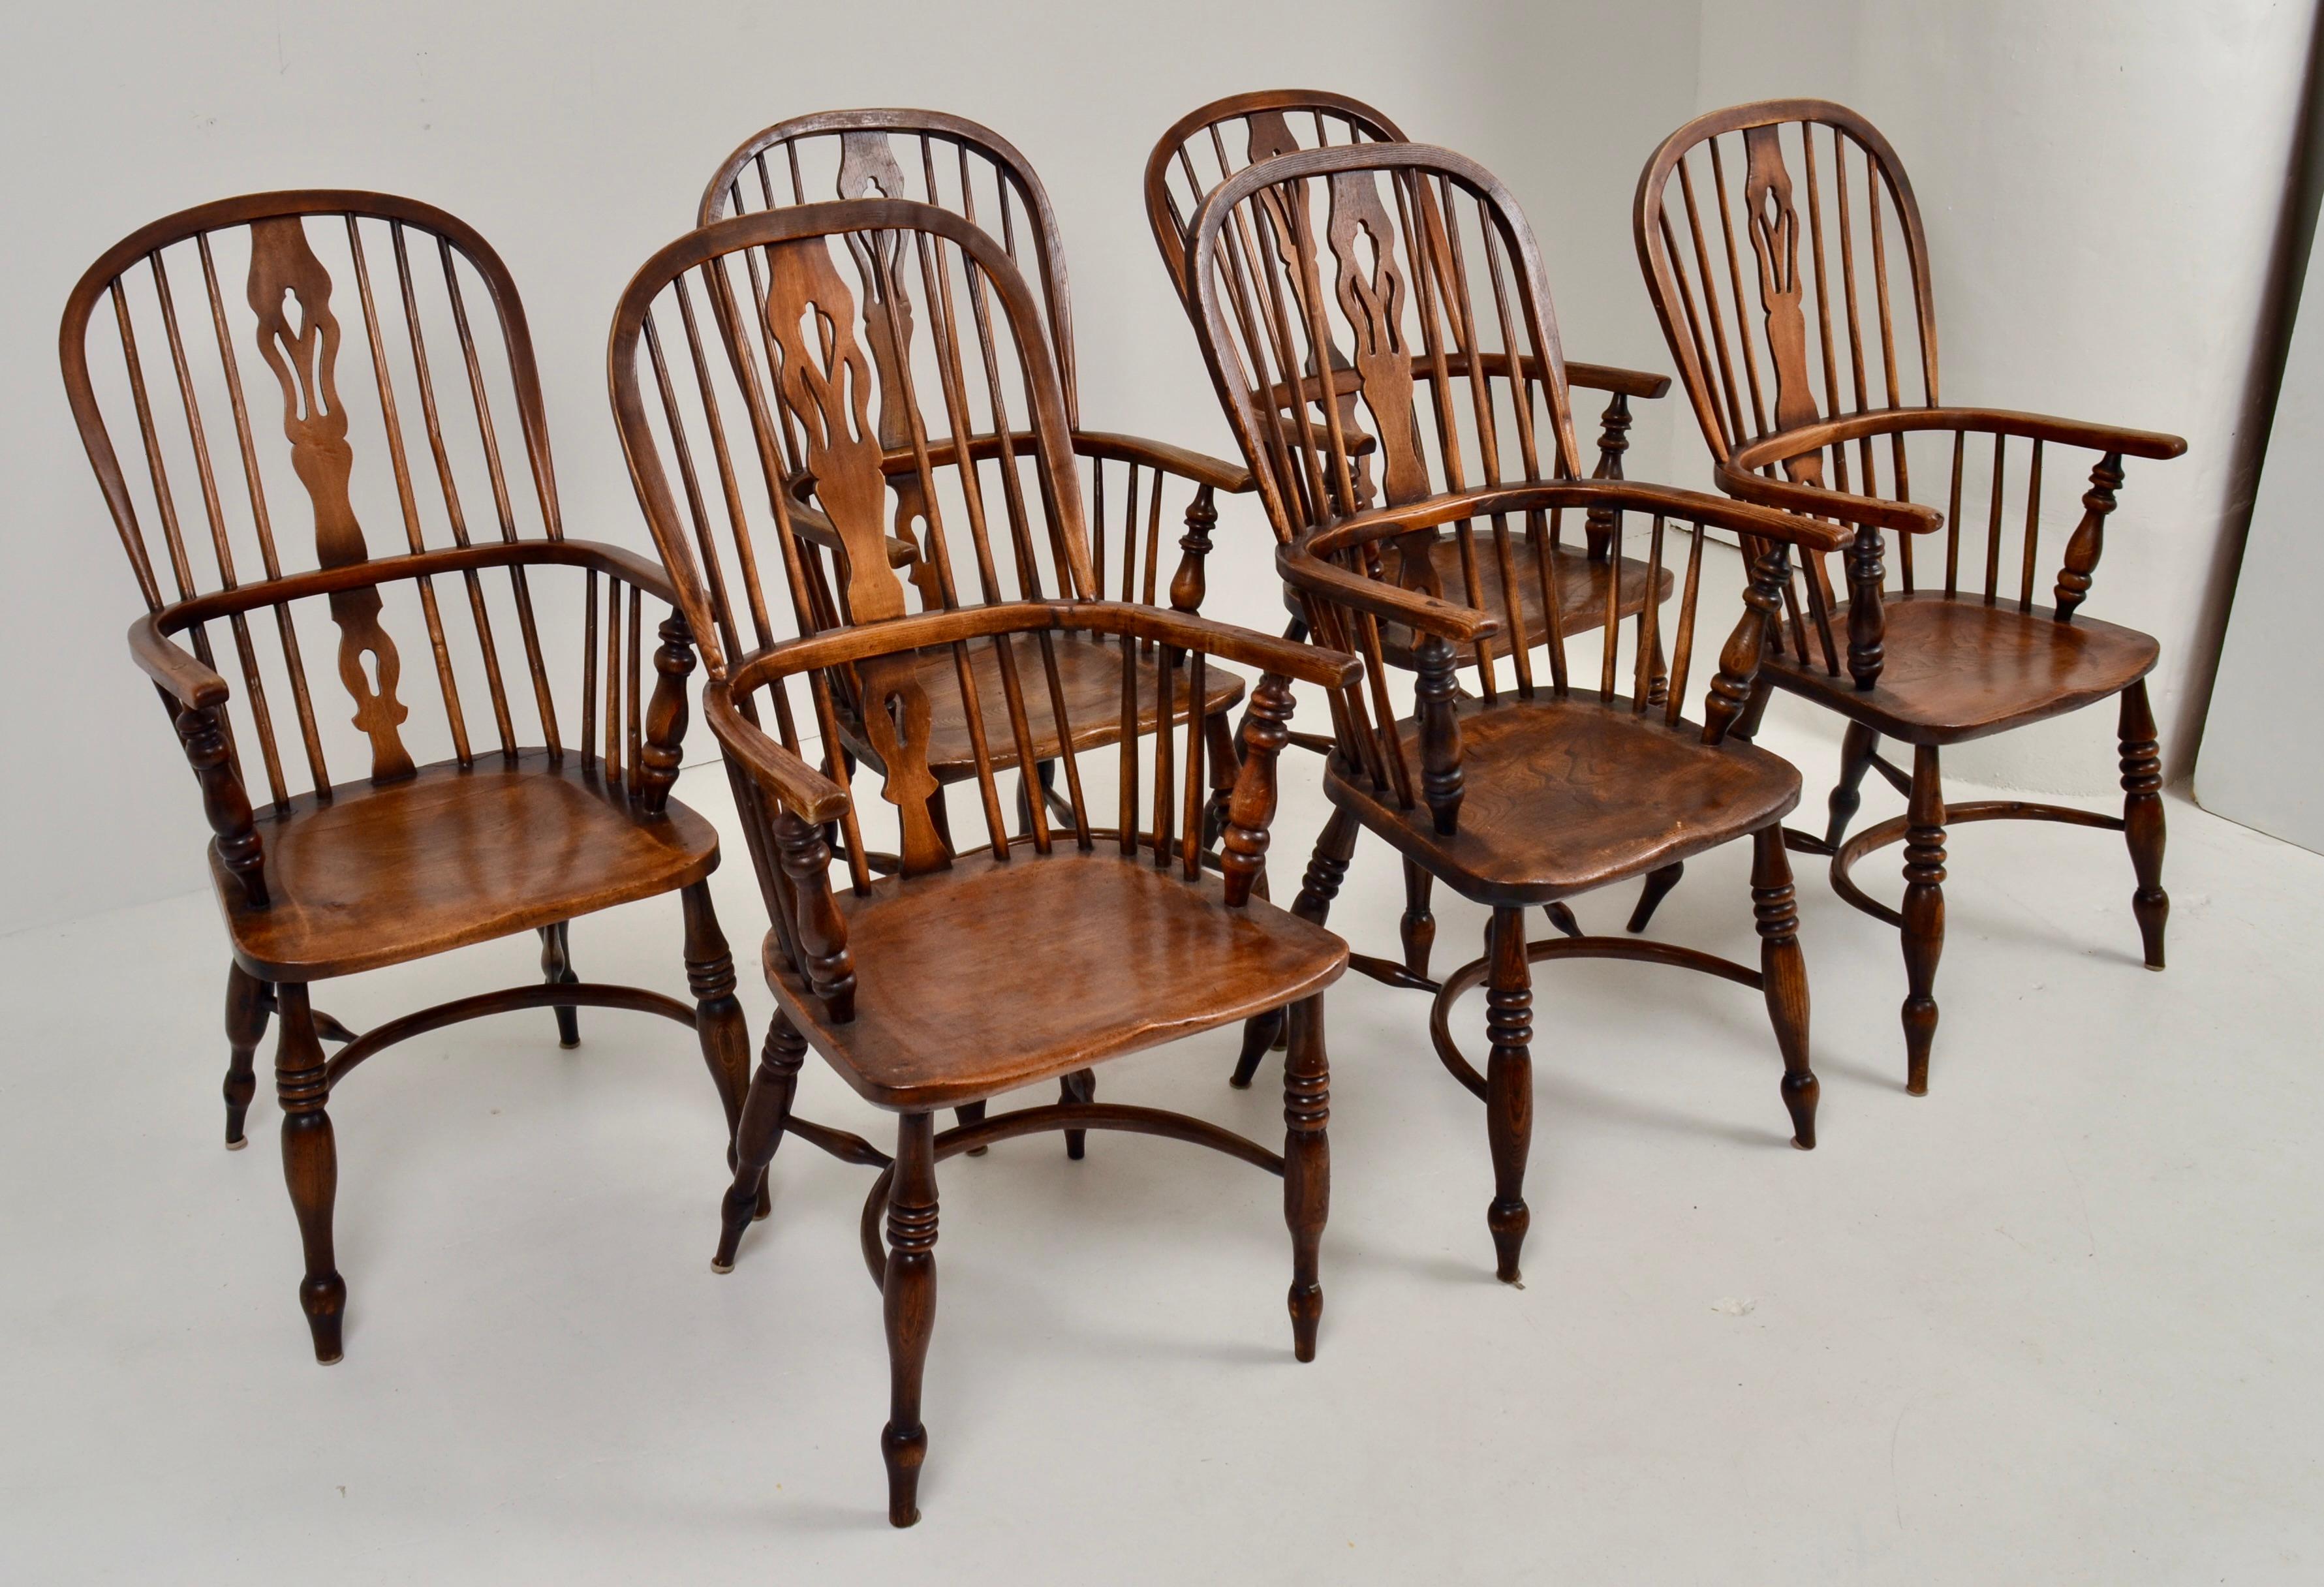 19th C English Oak Windsor Chairs - Set of Six For Sale 3